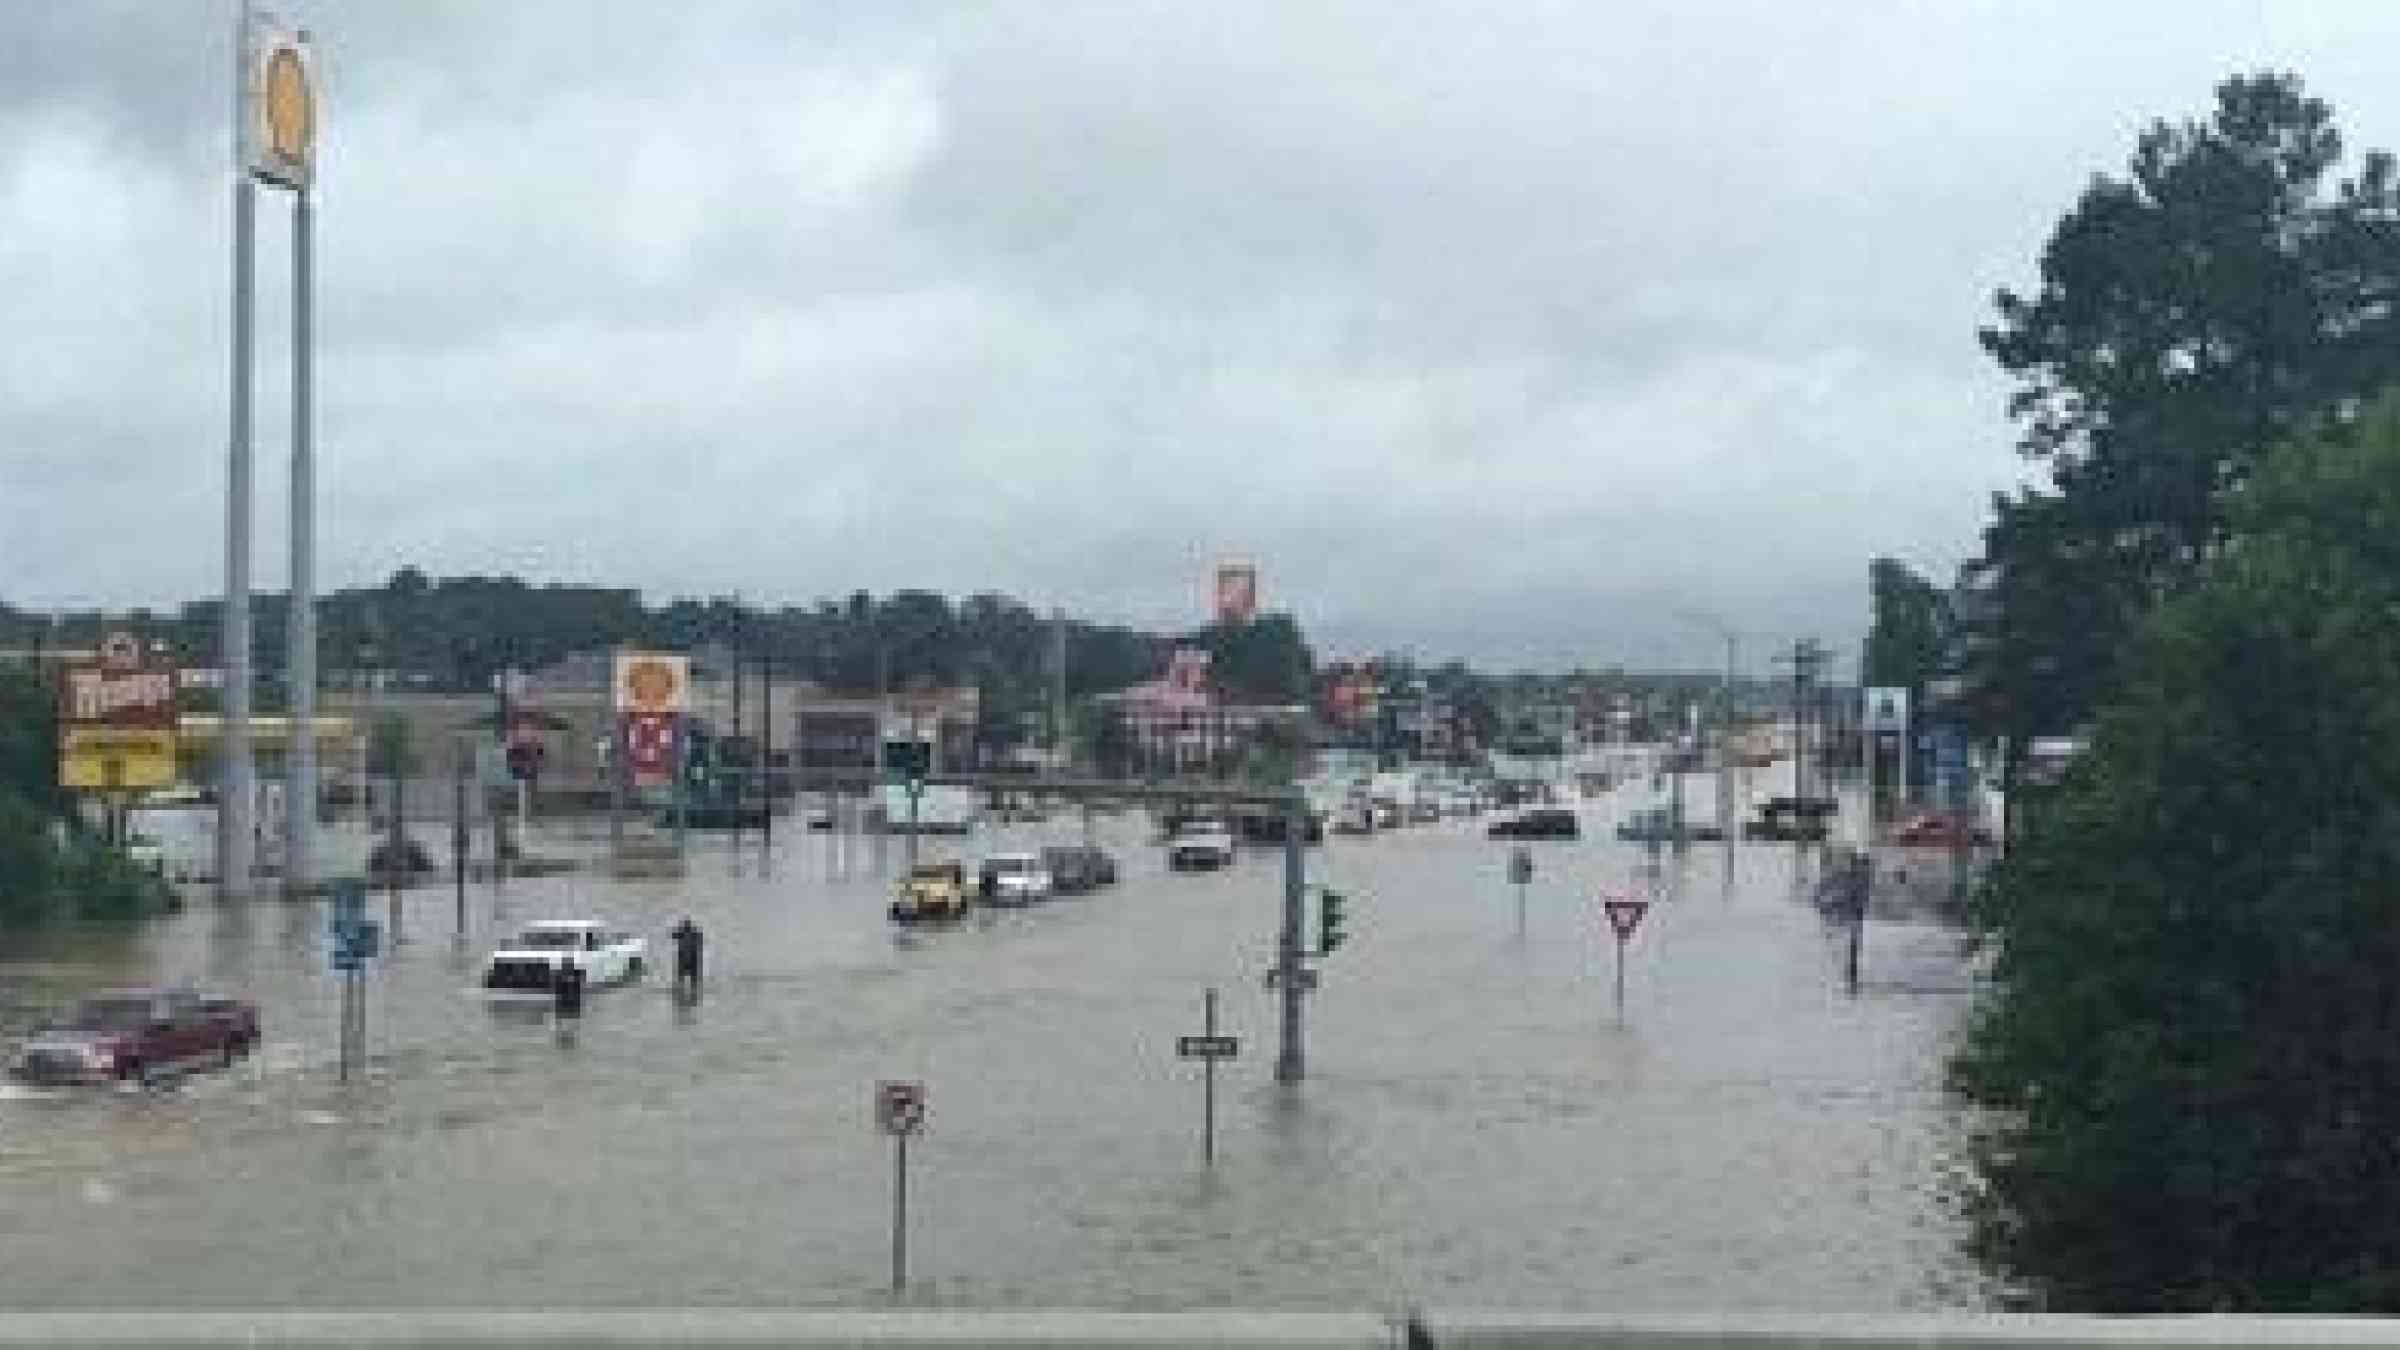 Floodwaters in Denham Springs, Louisiana, on August 13 (Photo: Louisiana Department of Transportation and Development)